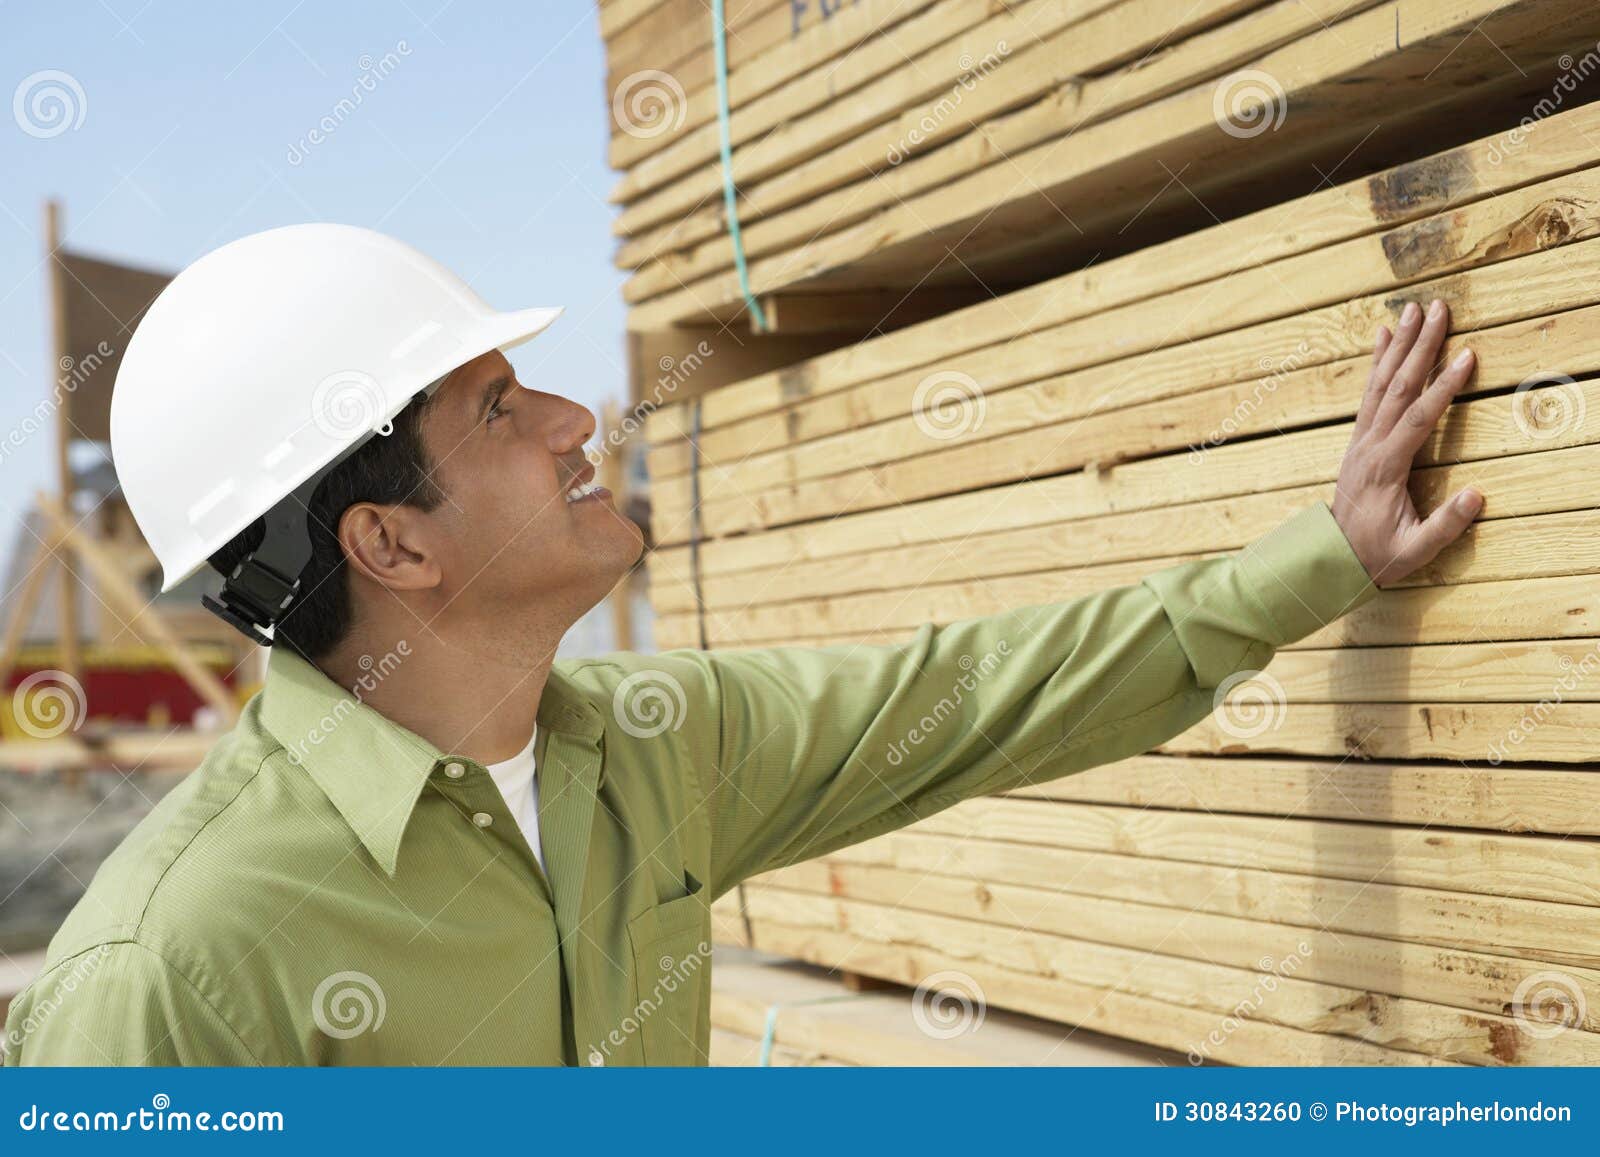 construction worker in hardhat inspecting lumber